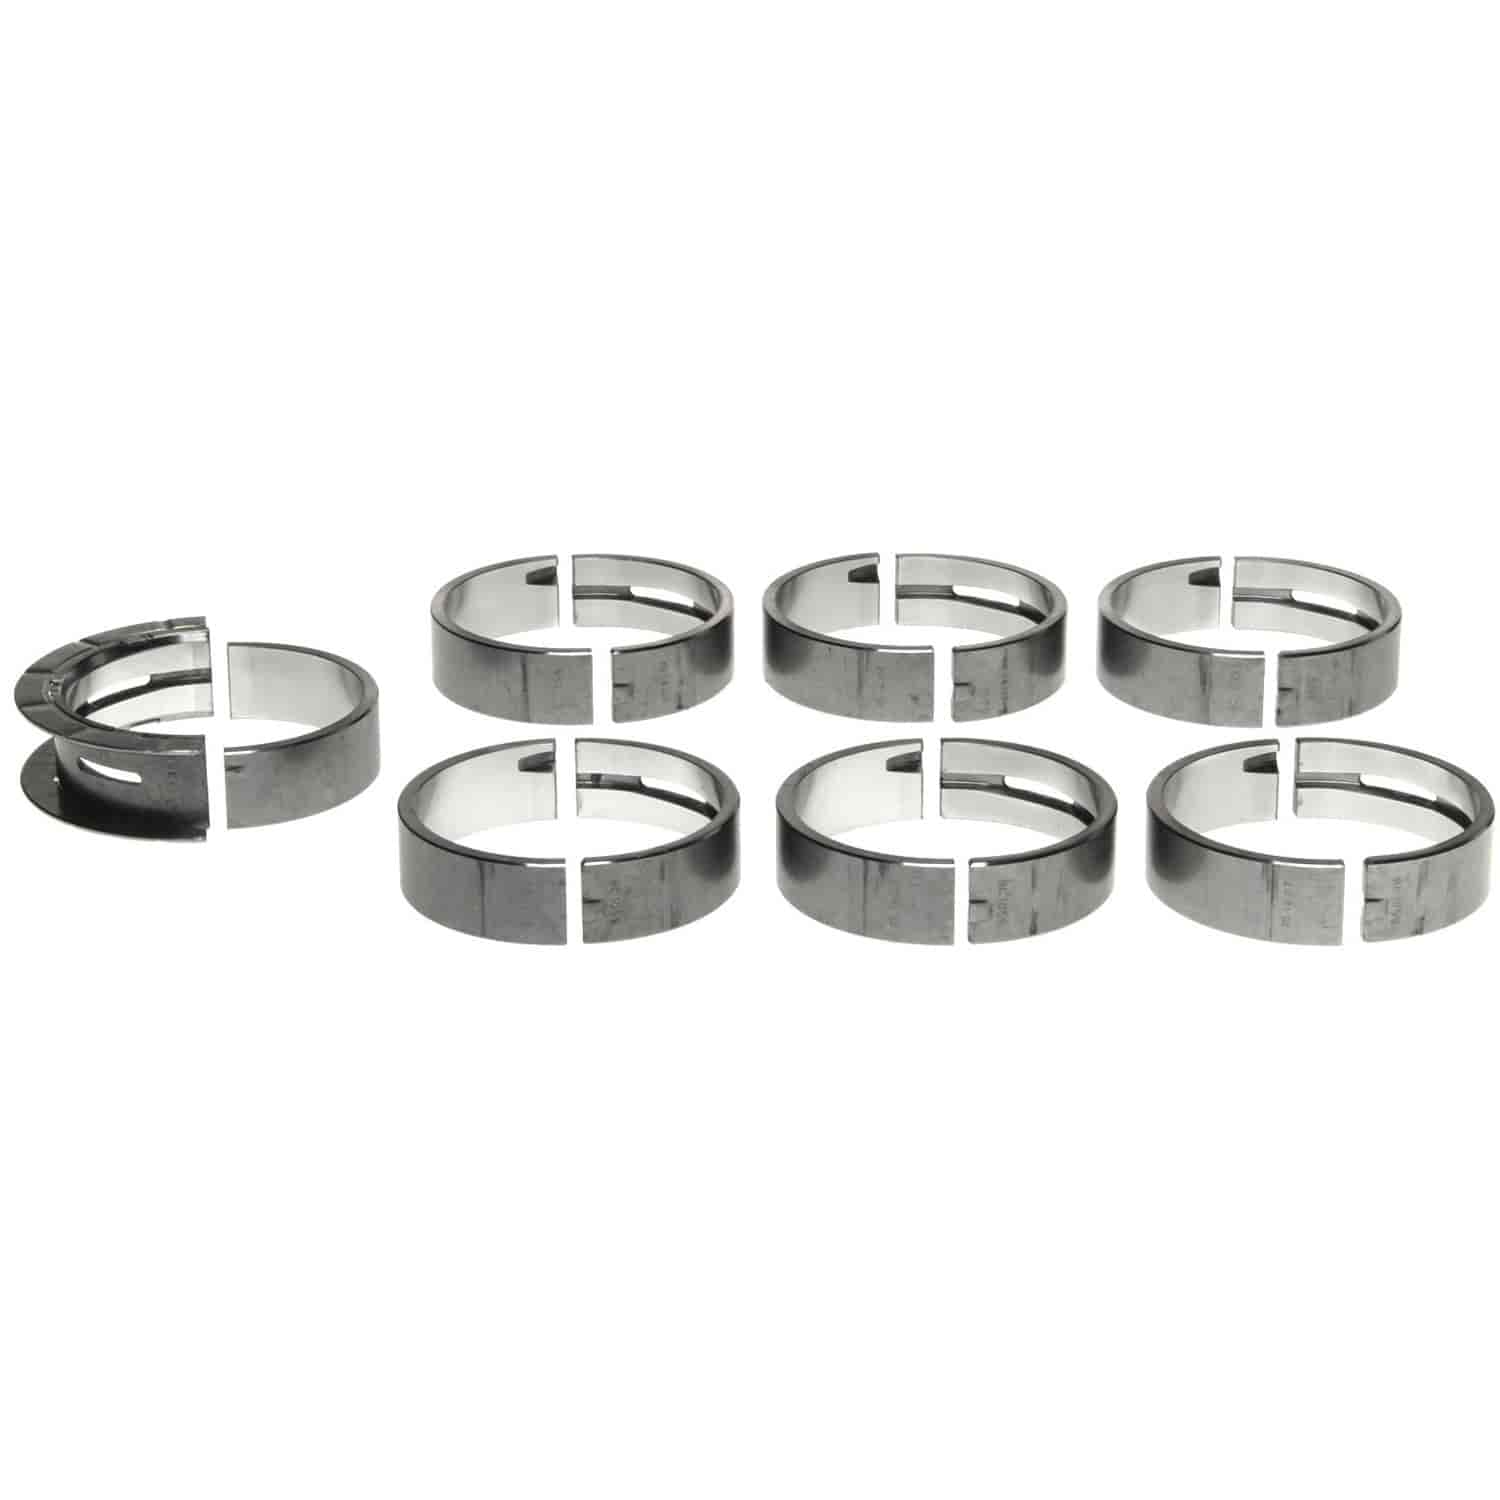 Main Bearing Set Chevy 2002-2009 L6 4.2L with Standard Size